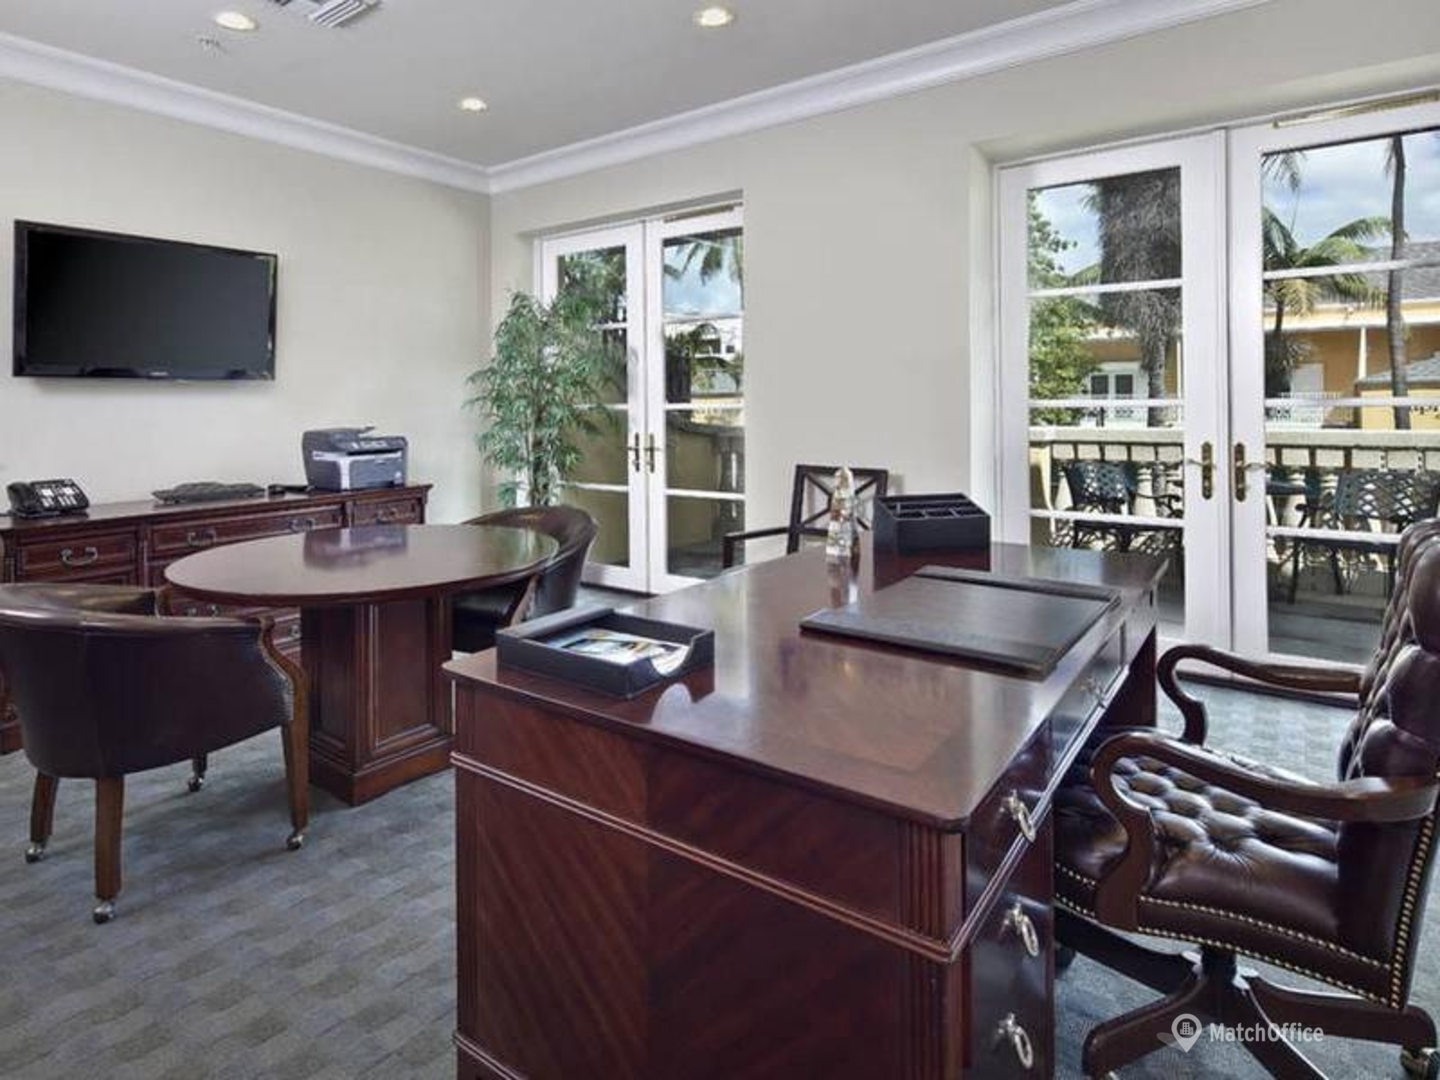 The Best Business Centers for Rent in 780 Fifth Avenue South, Naples,  Florida, 34102 Naples, FL ✓ MatchOffice